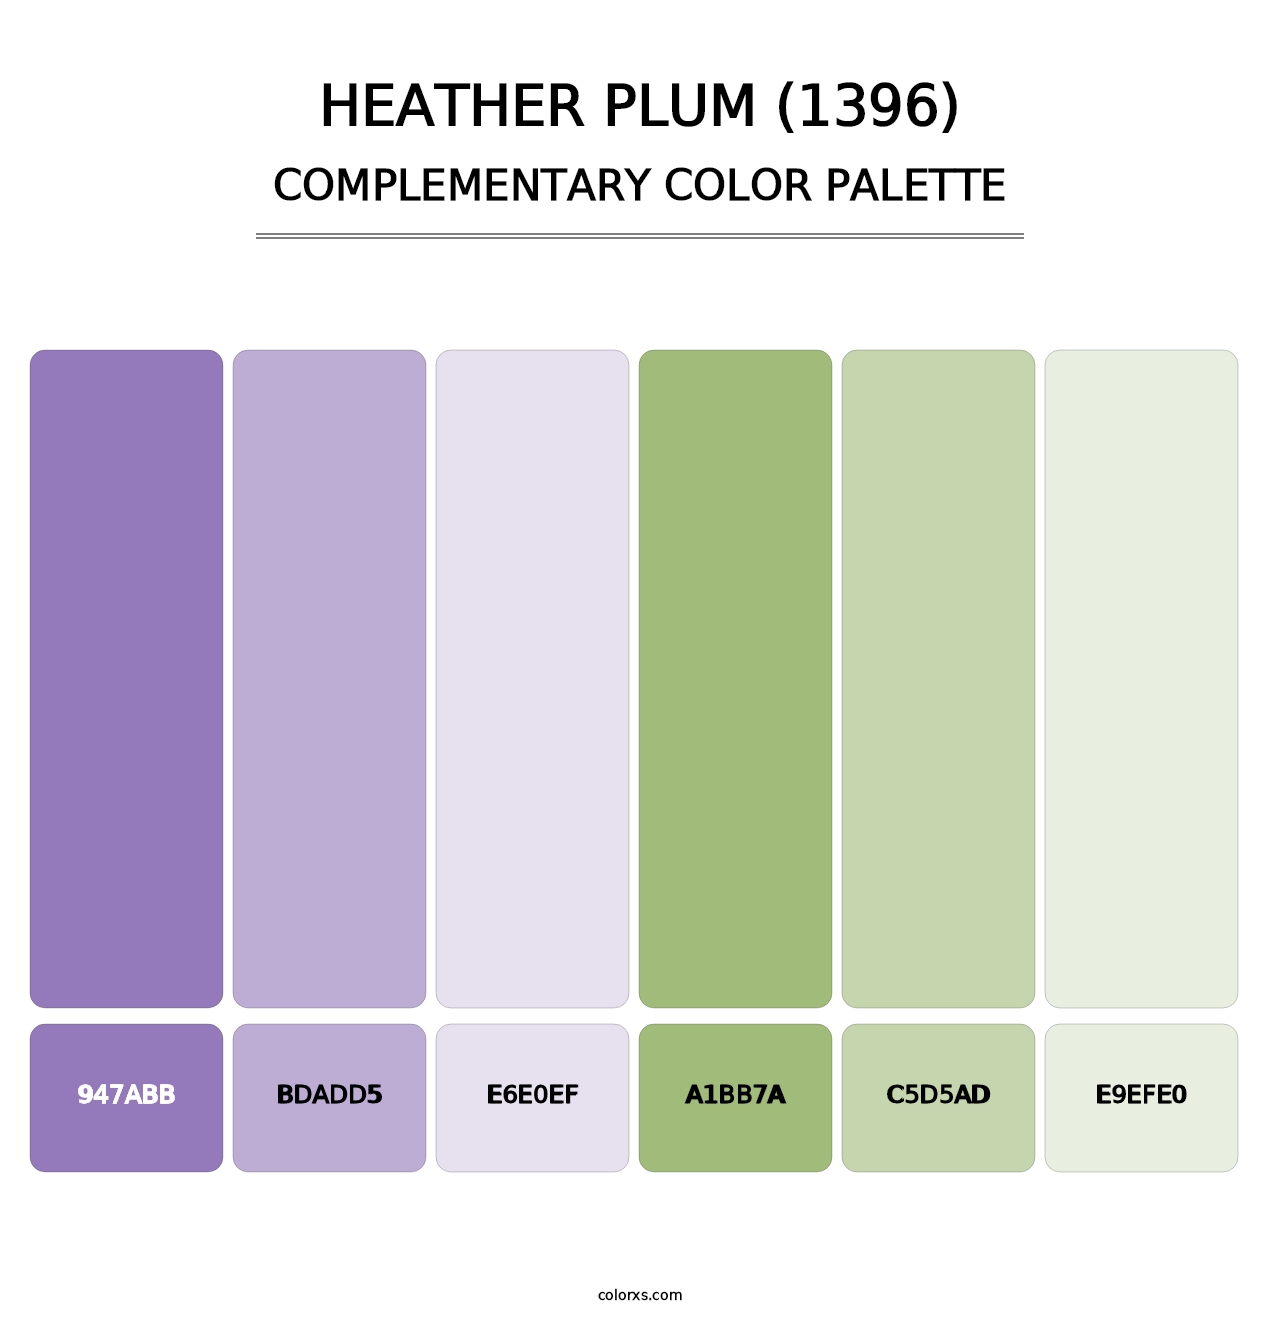 Heather Plum (1396) - Complementary Color Palette